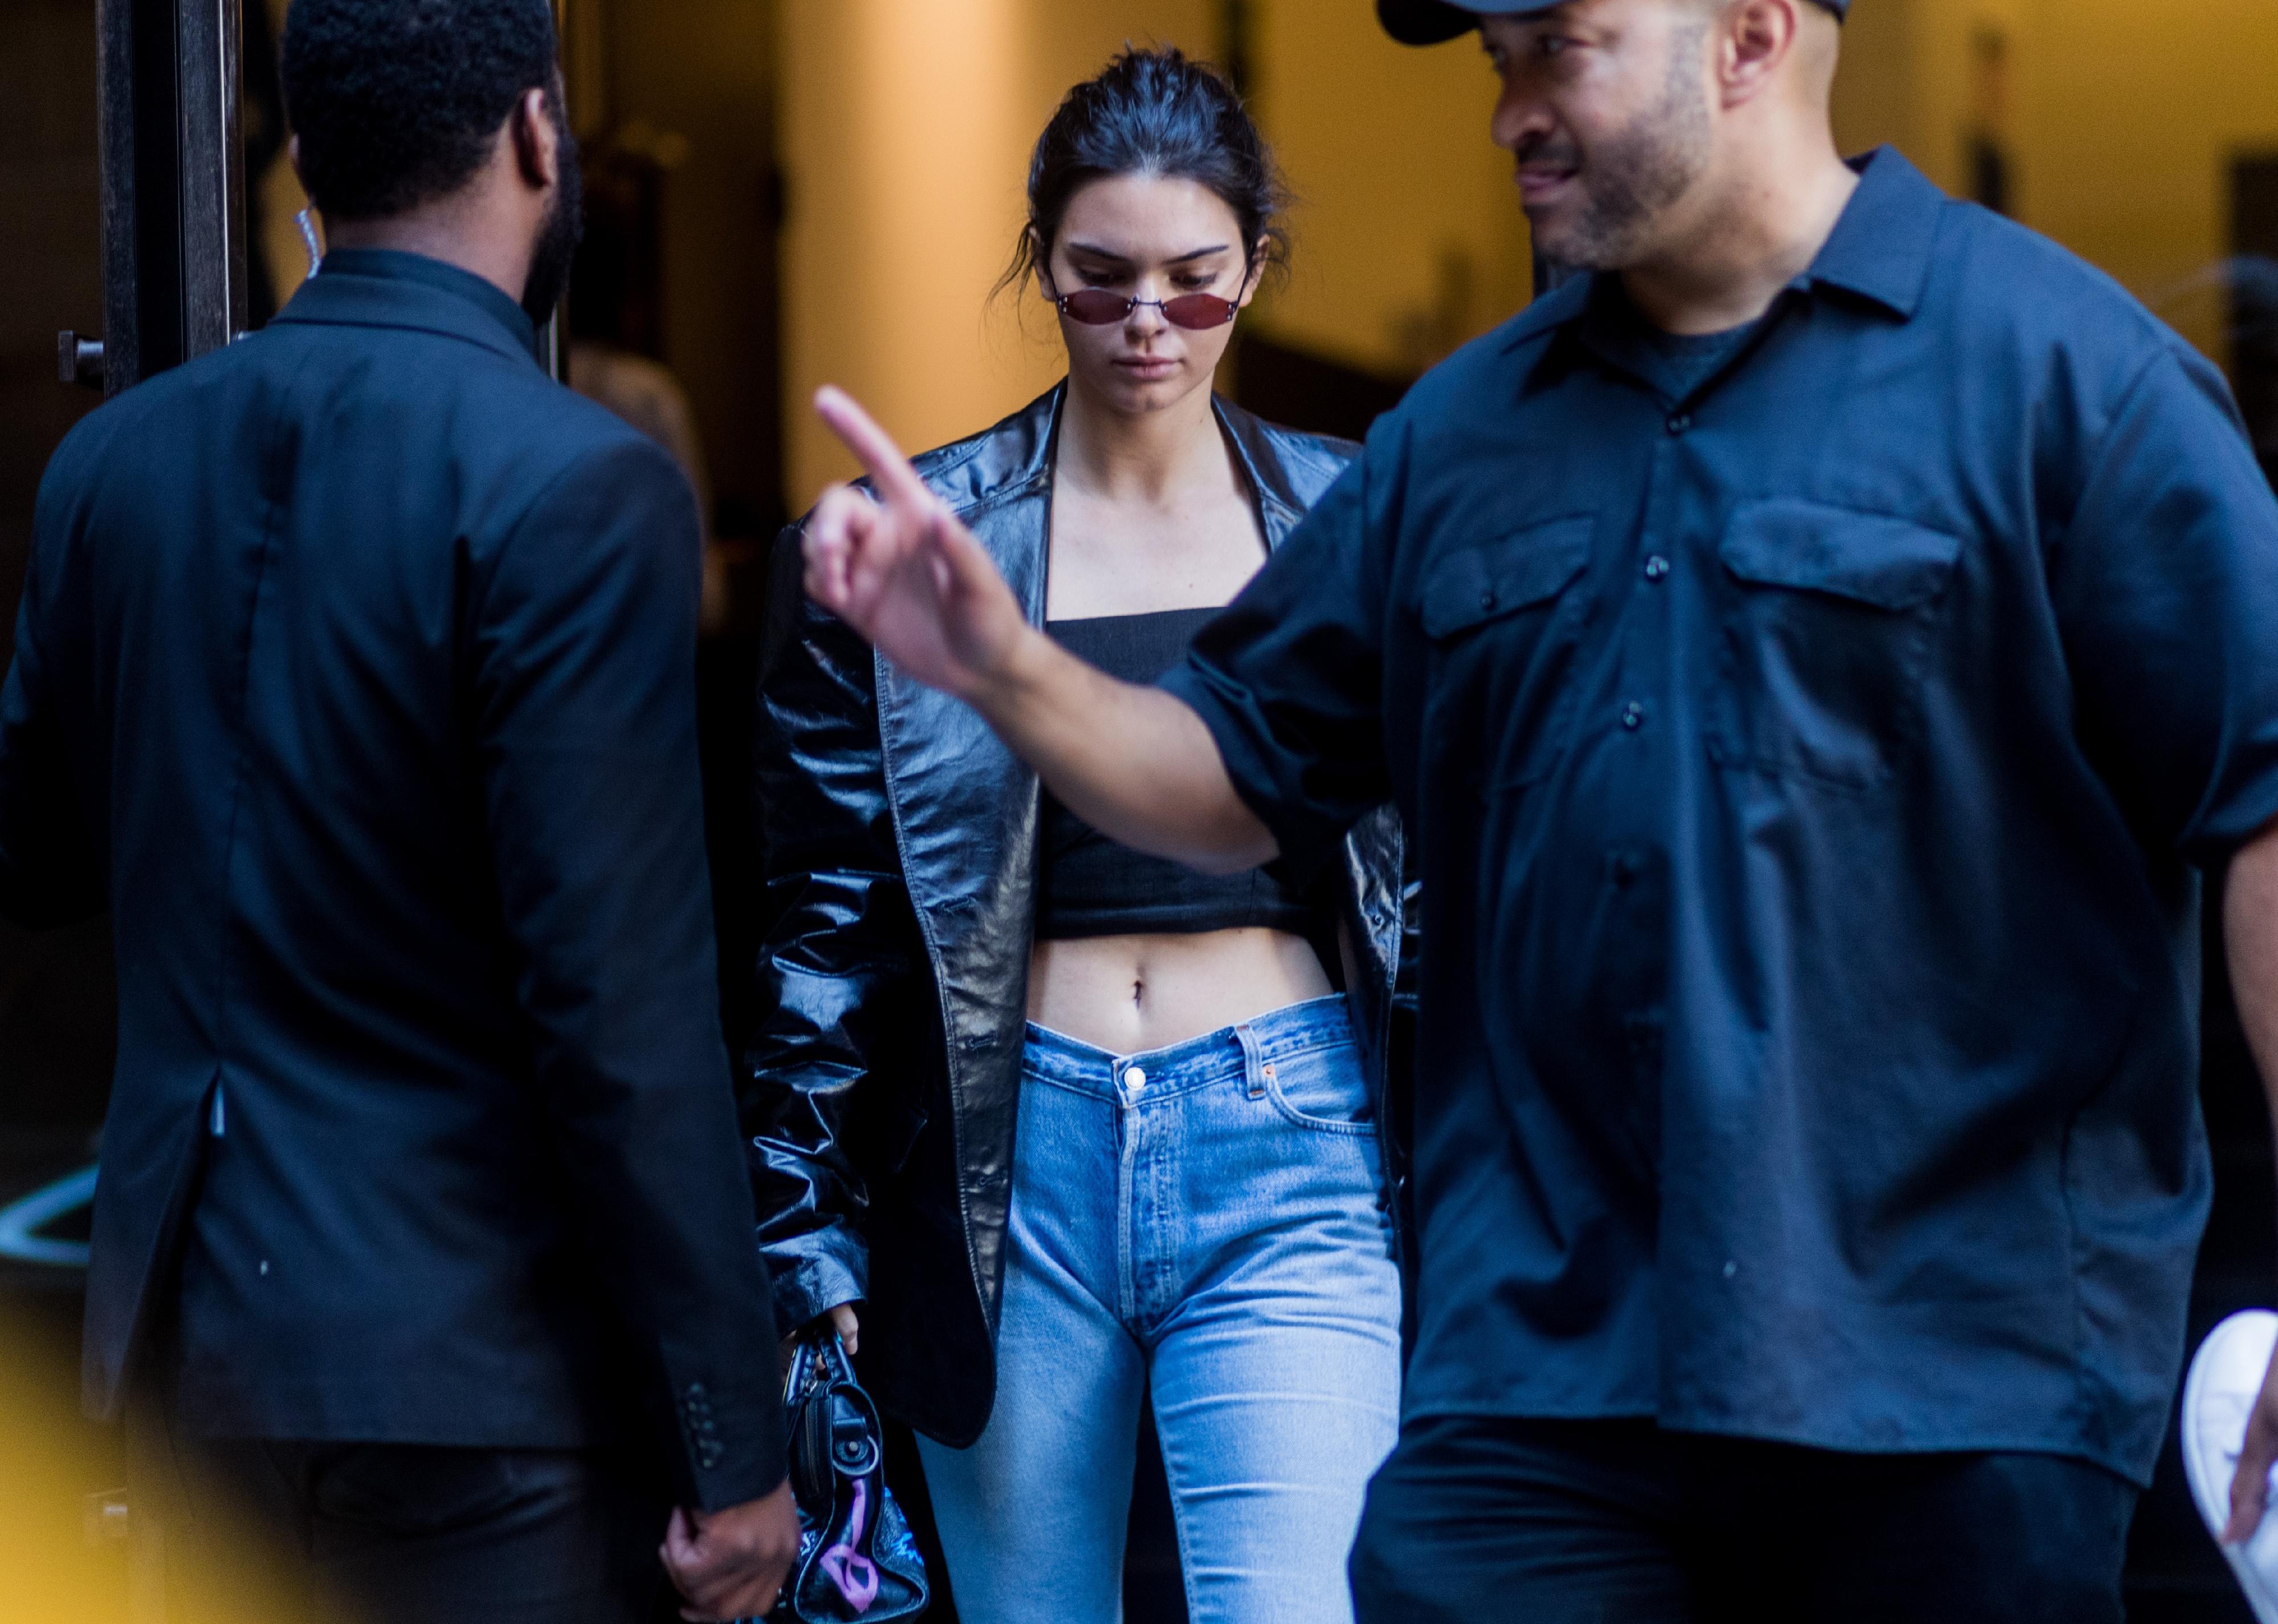 Kendall Jenner wearing cropped top, denim jeans, black jacket seen in the streets of Manhattan.